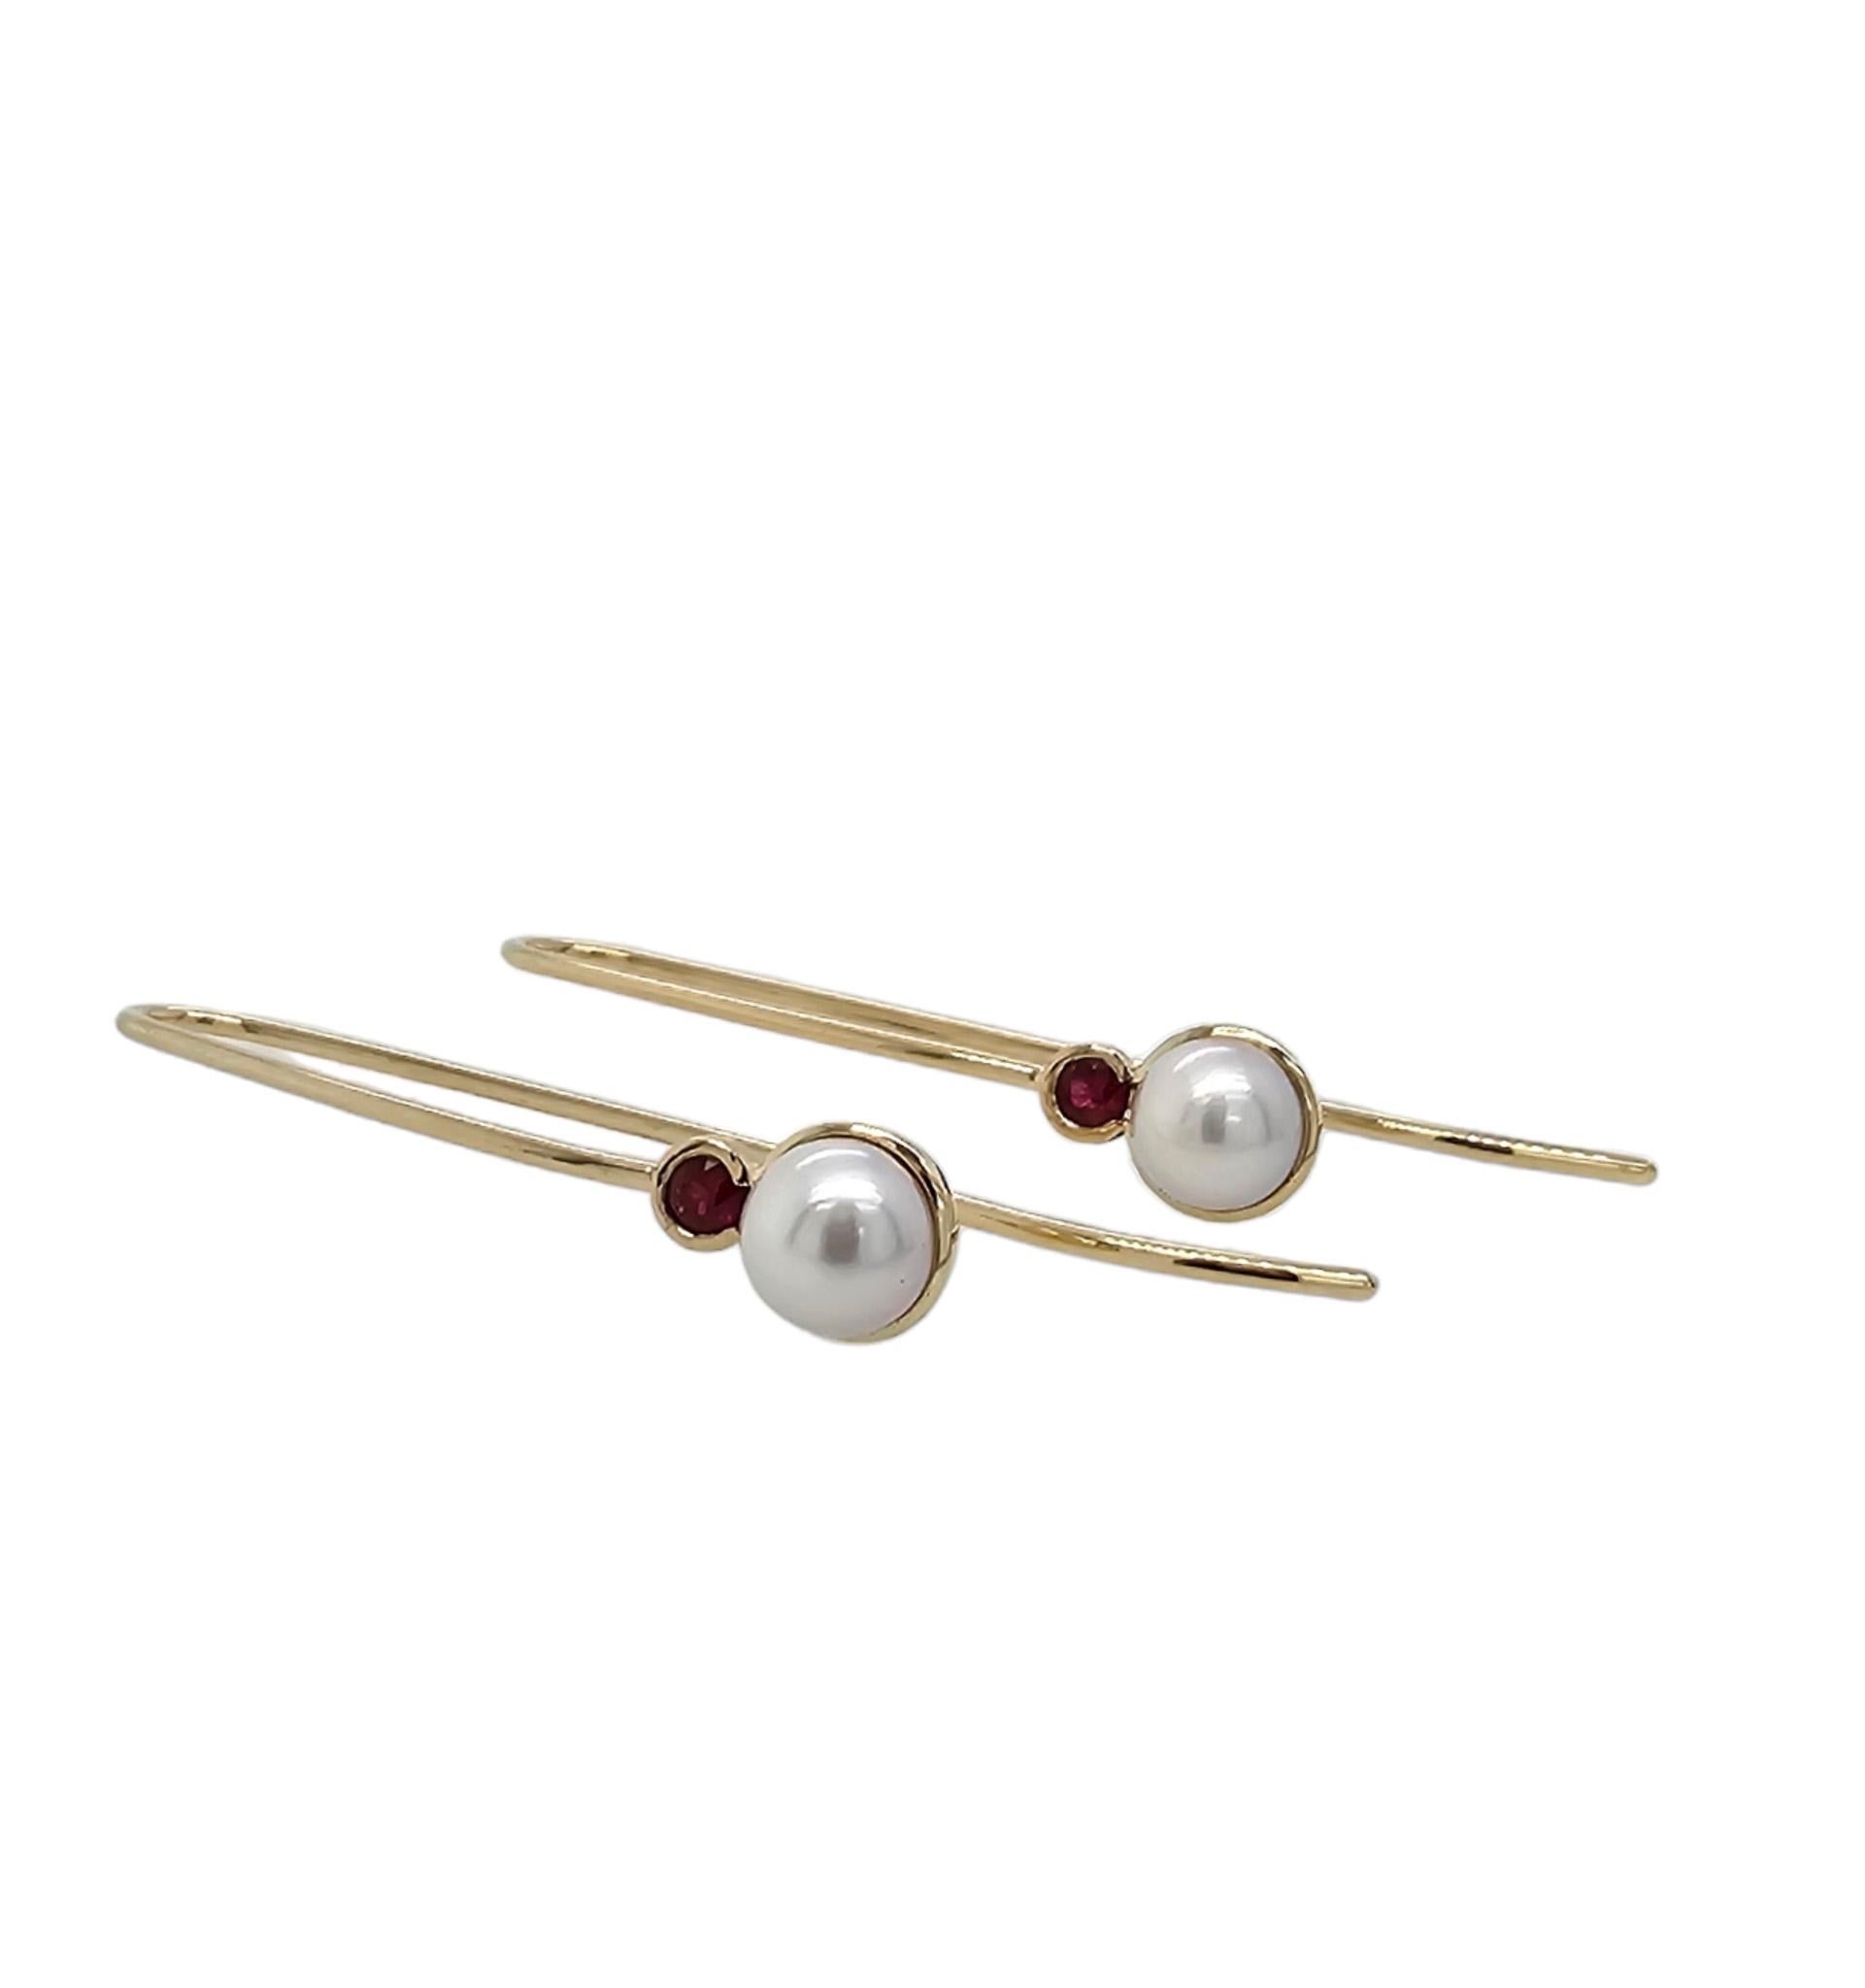 Women's 18ct Yellow Gold & Pearl Earrings Featuring Rubies 